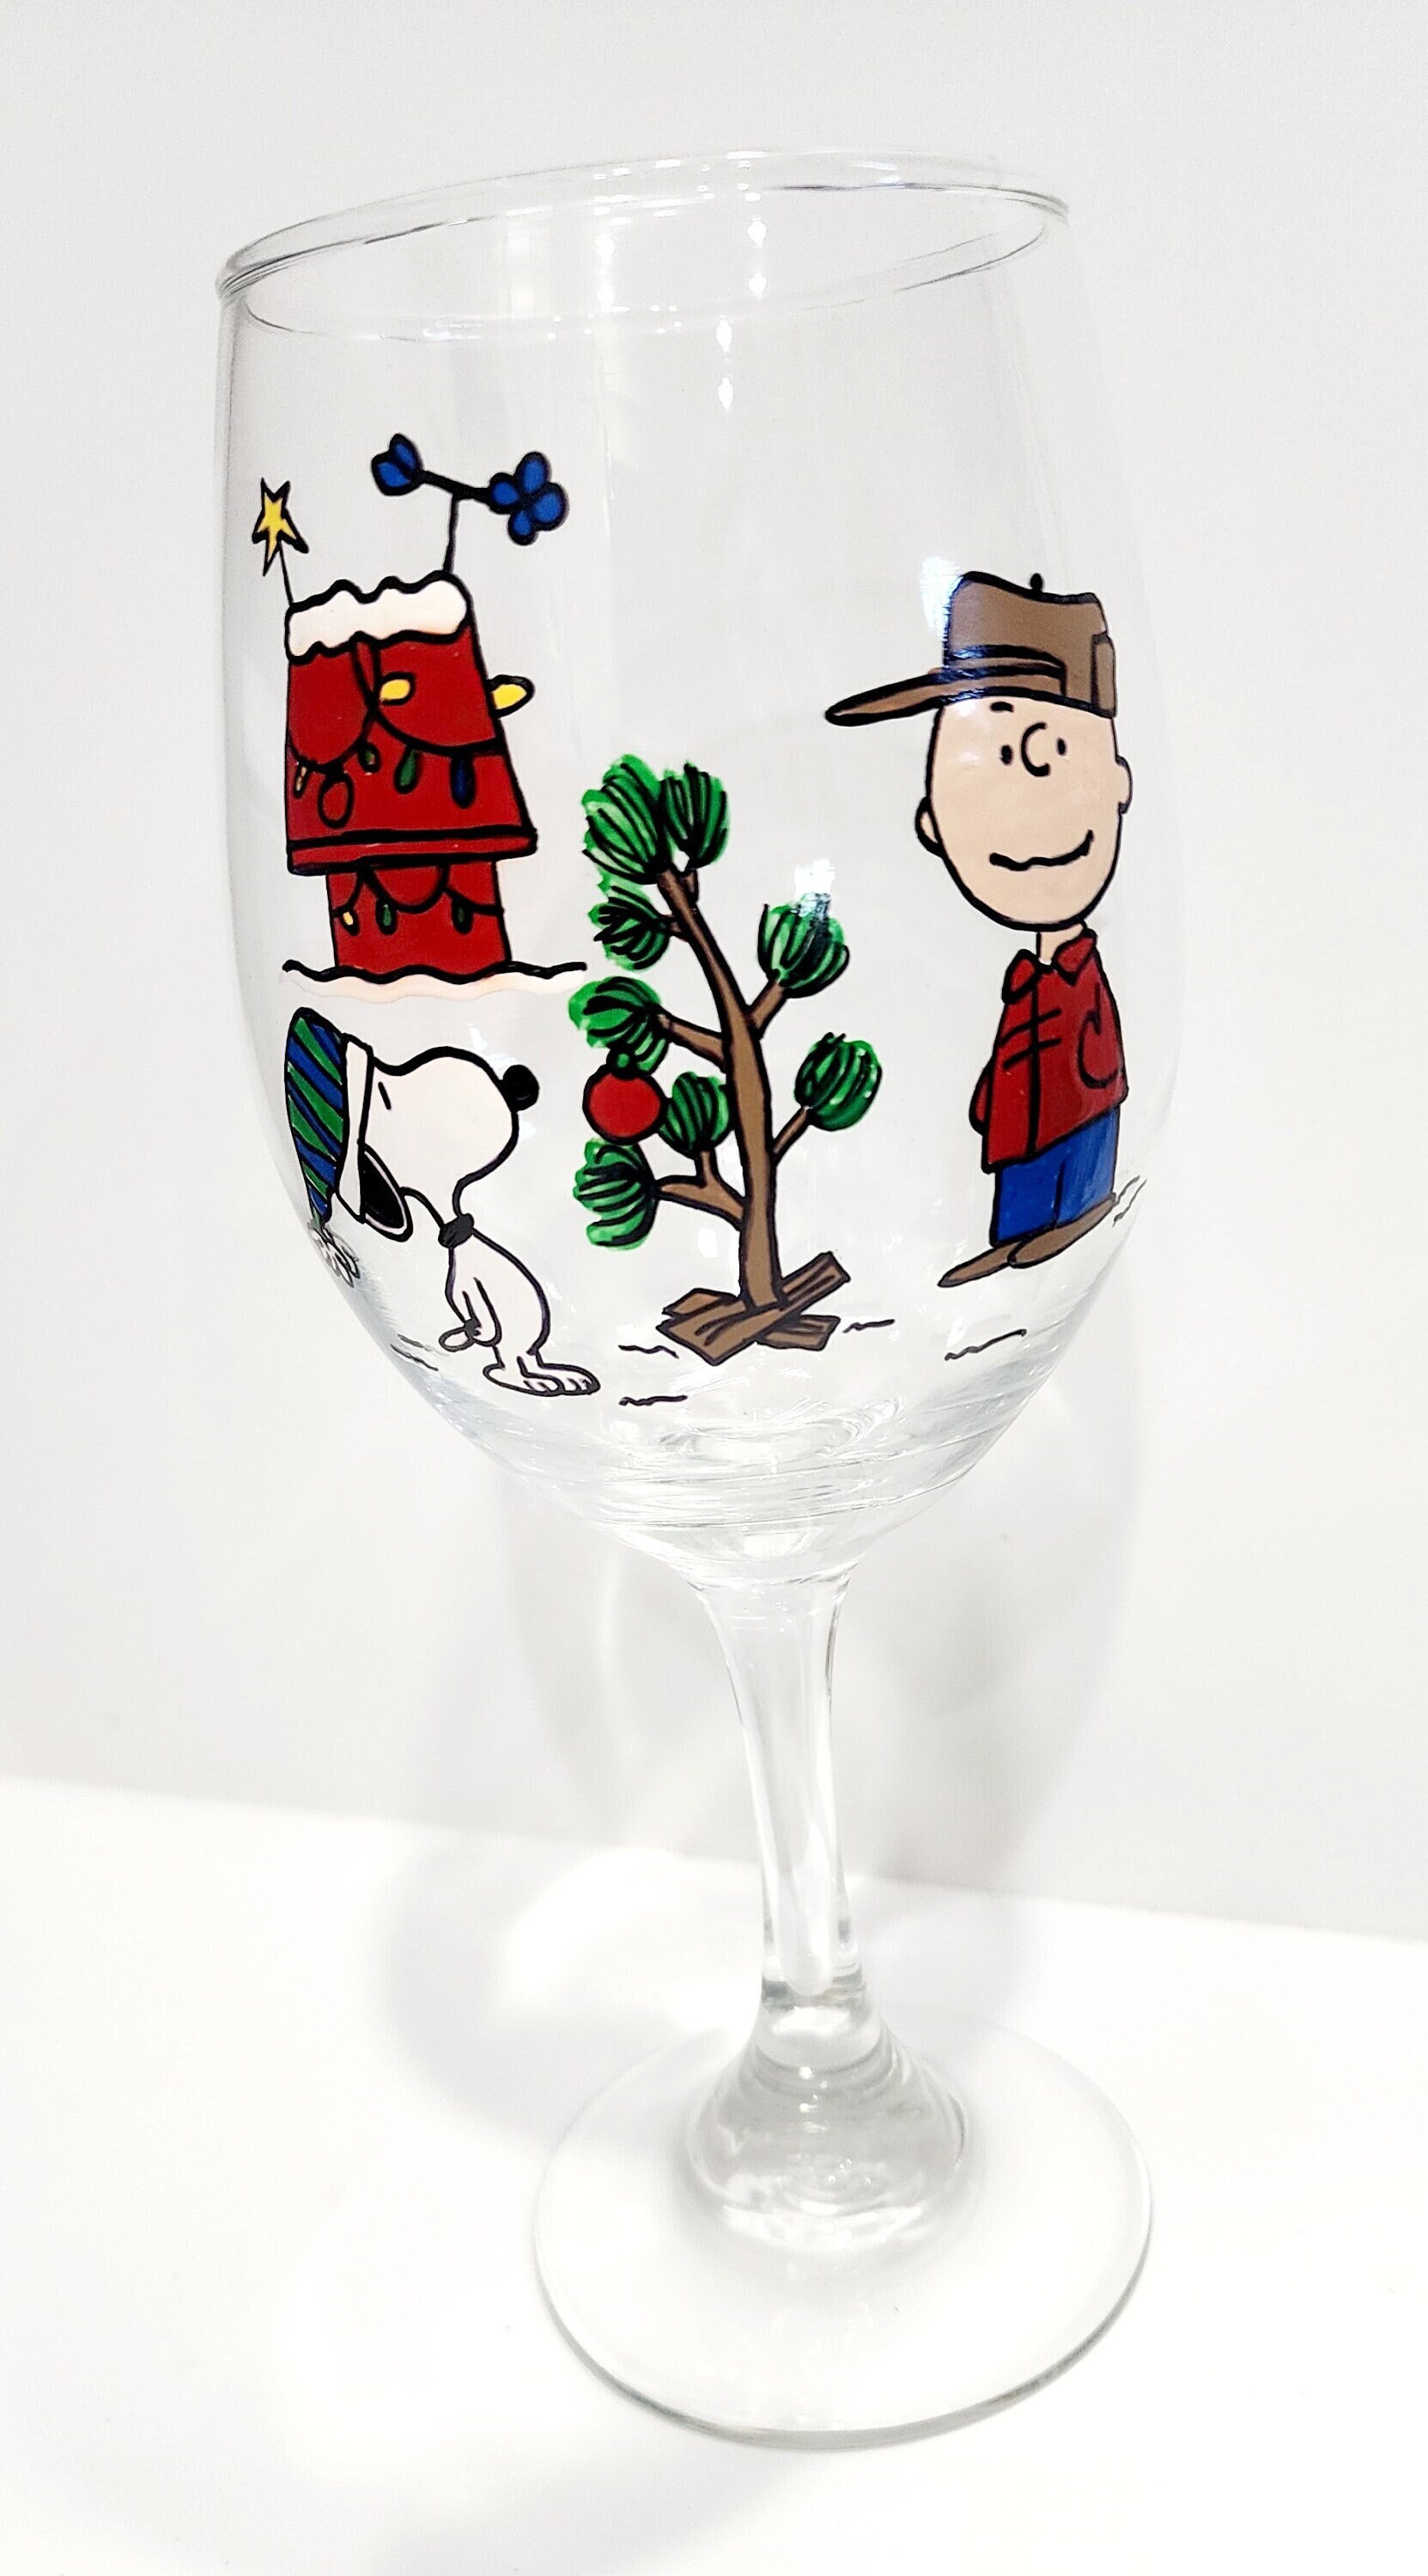 Snoopy Peanuts Love ❤️ Curved Wine Glass Cup Set 2 Stemless